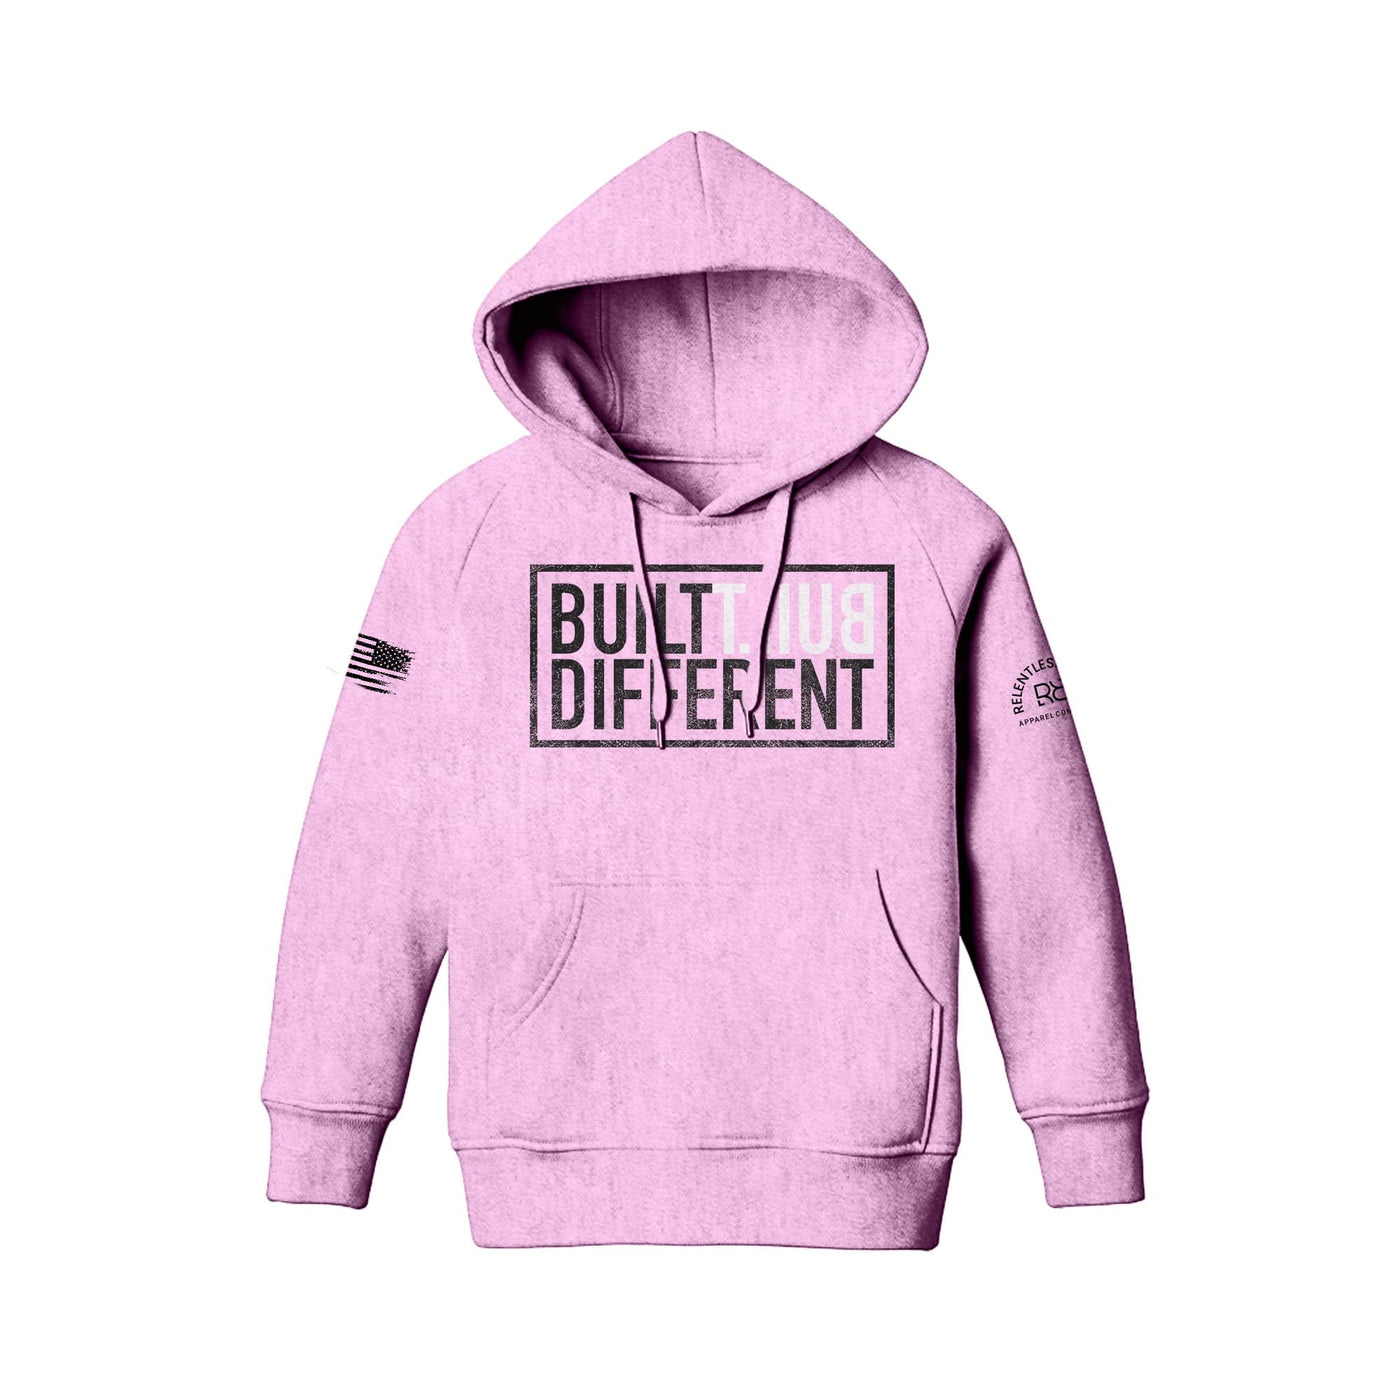 Built Different Youth front design light pink hoodie